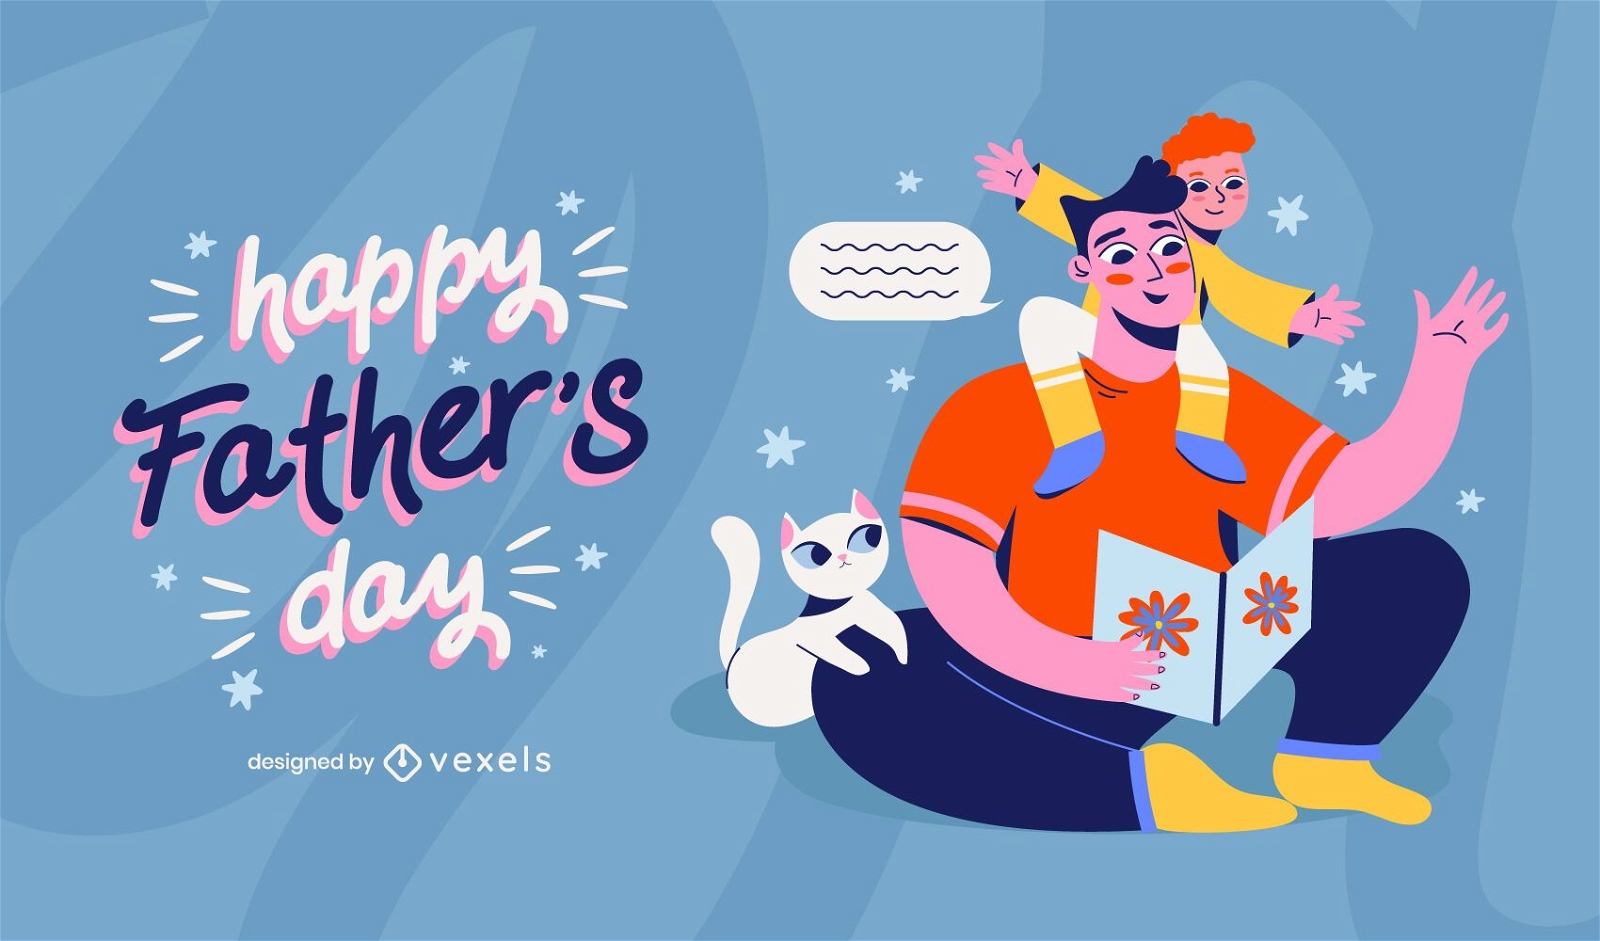 Happy fathers day family illustration